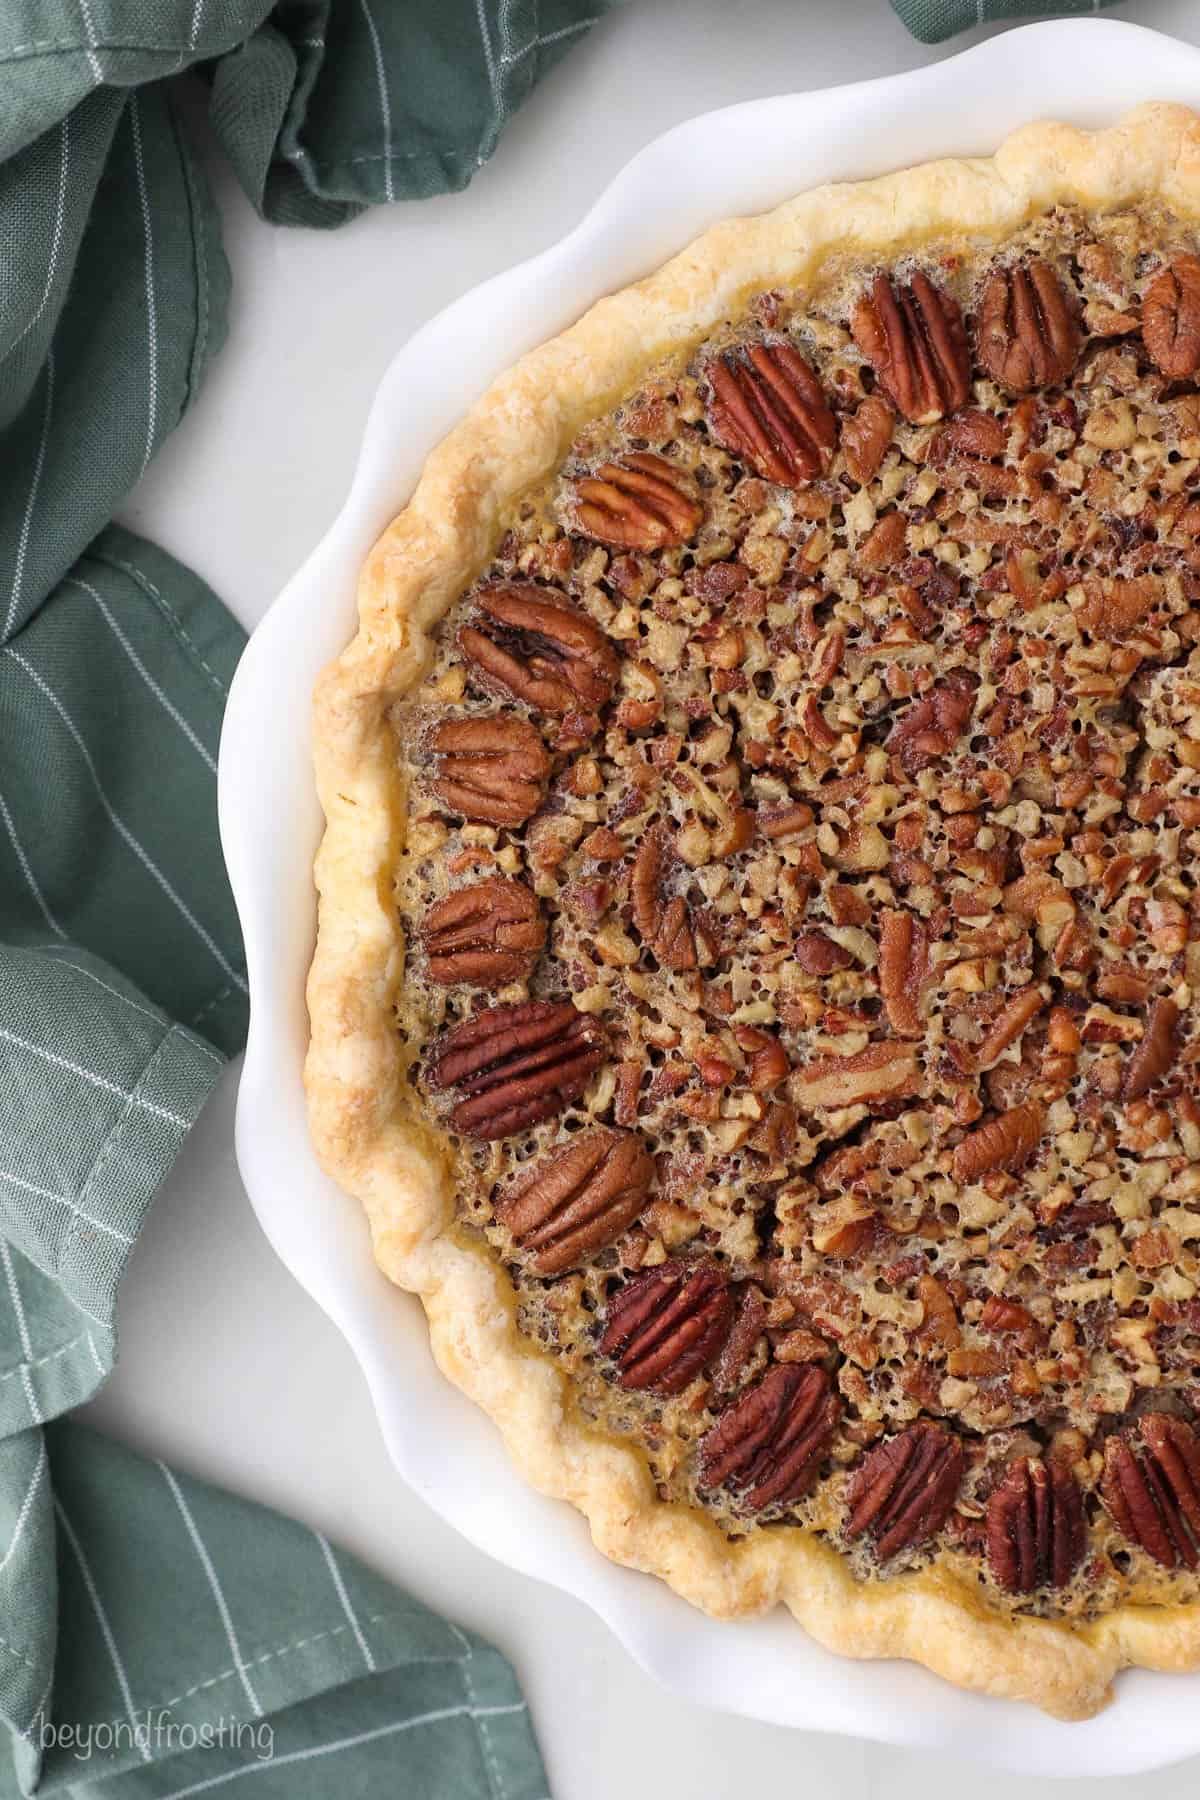 A bird's-eye view of half of a Kahlua pecan pie in a white pie dish